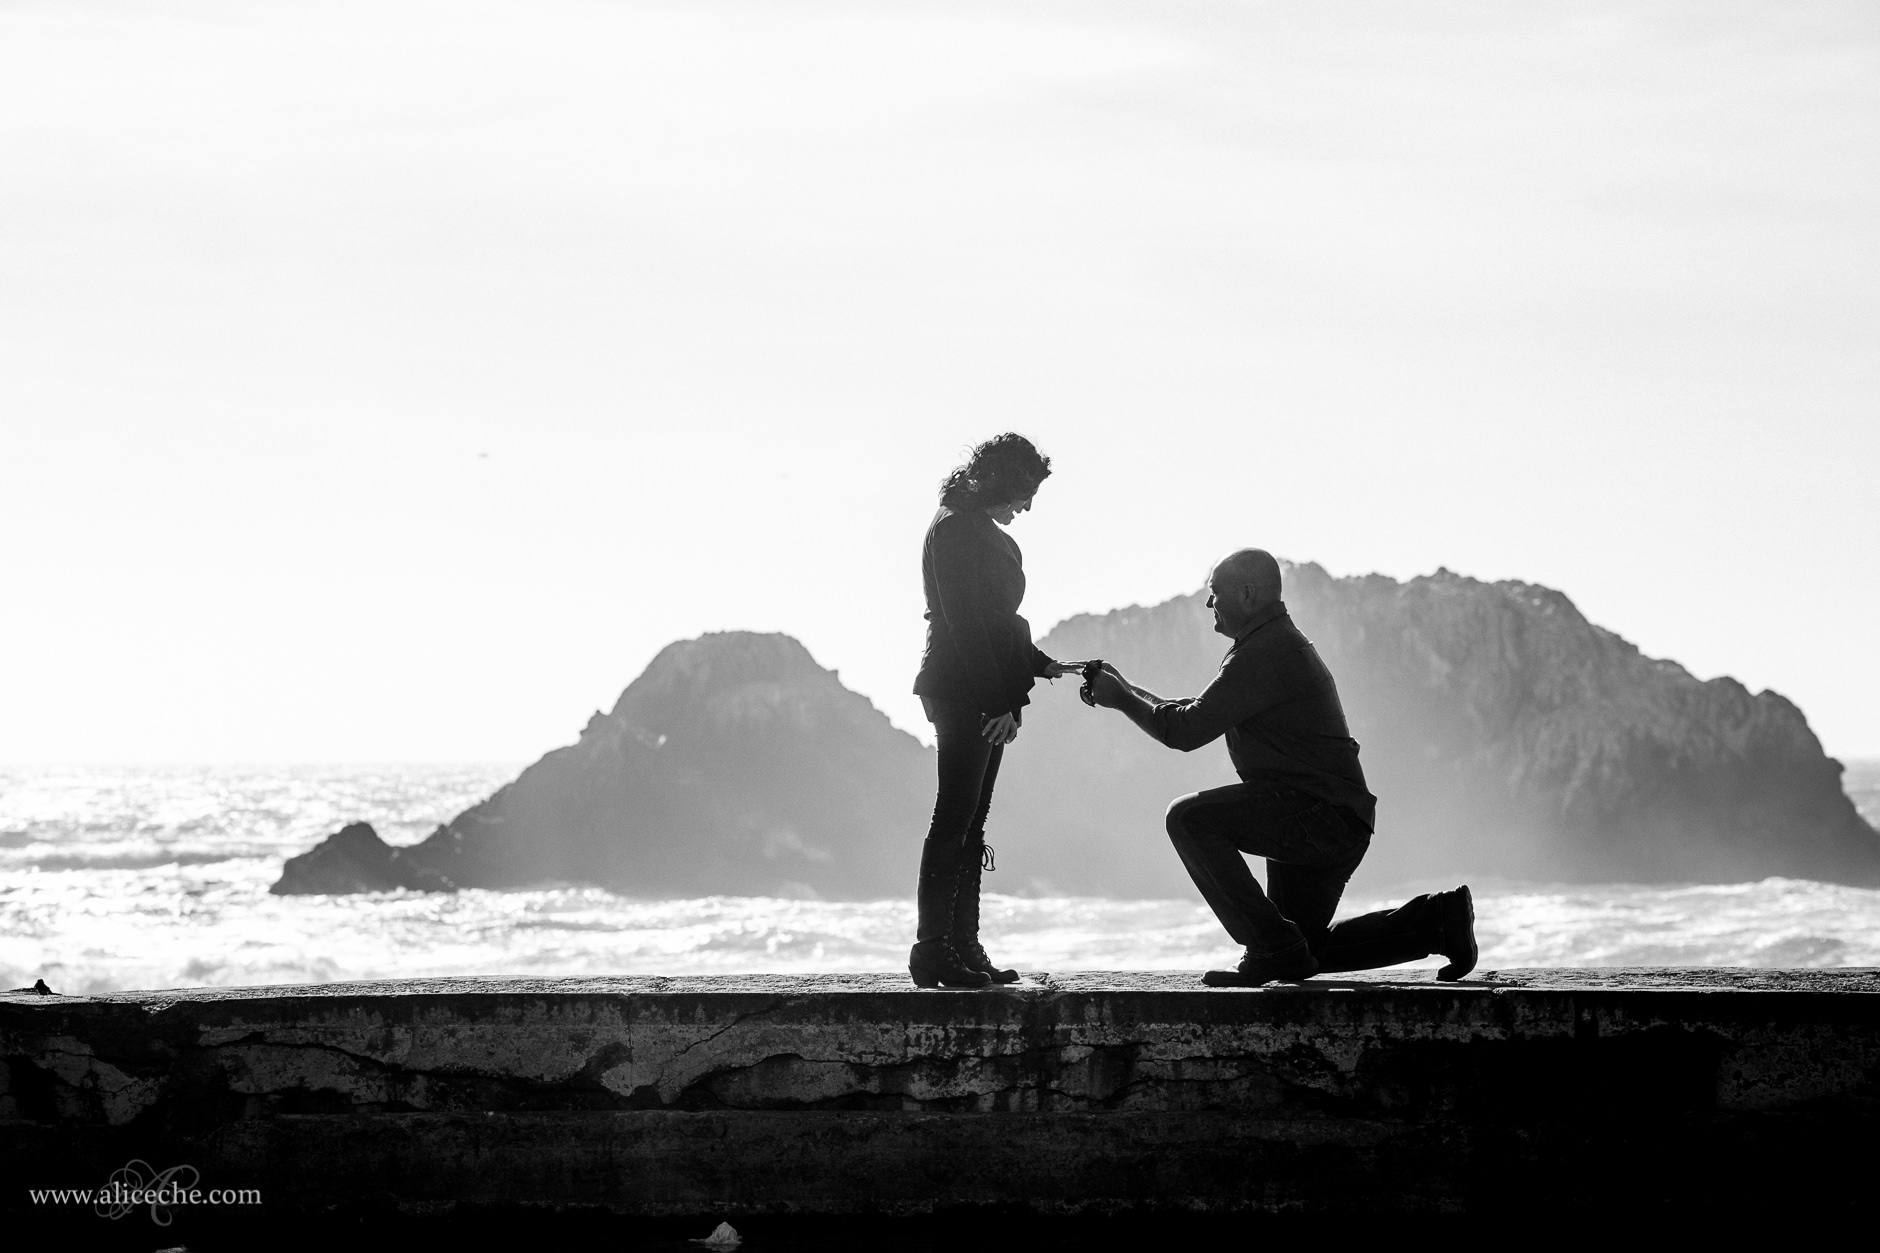 sutro-baths-proposal-black-and-white-alice-che-photography-san-francisco-engagement